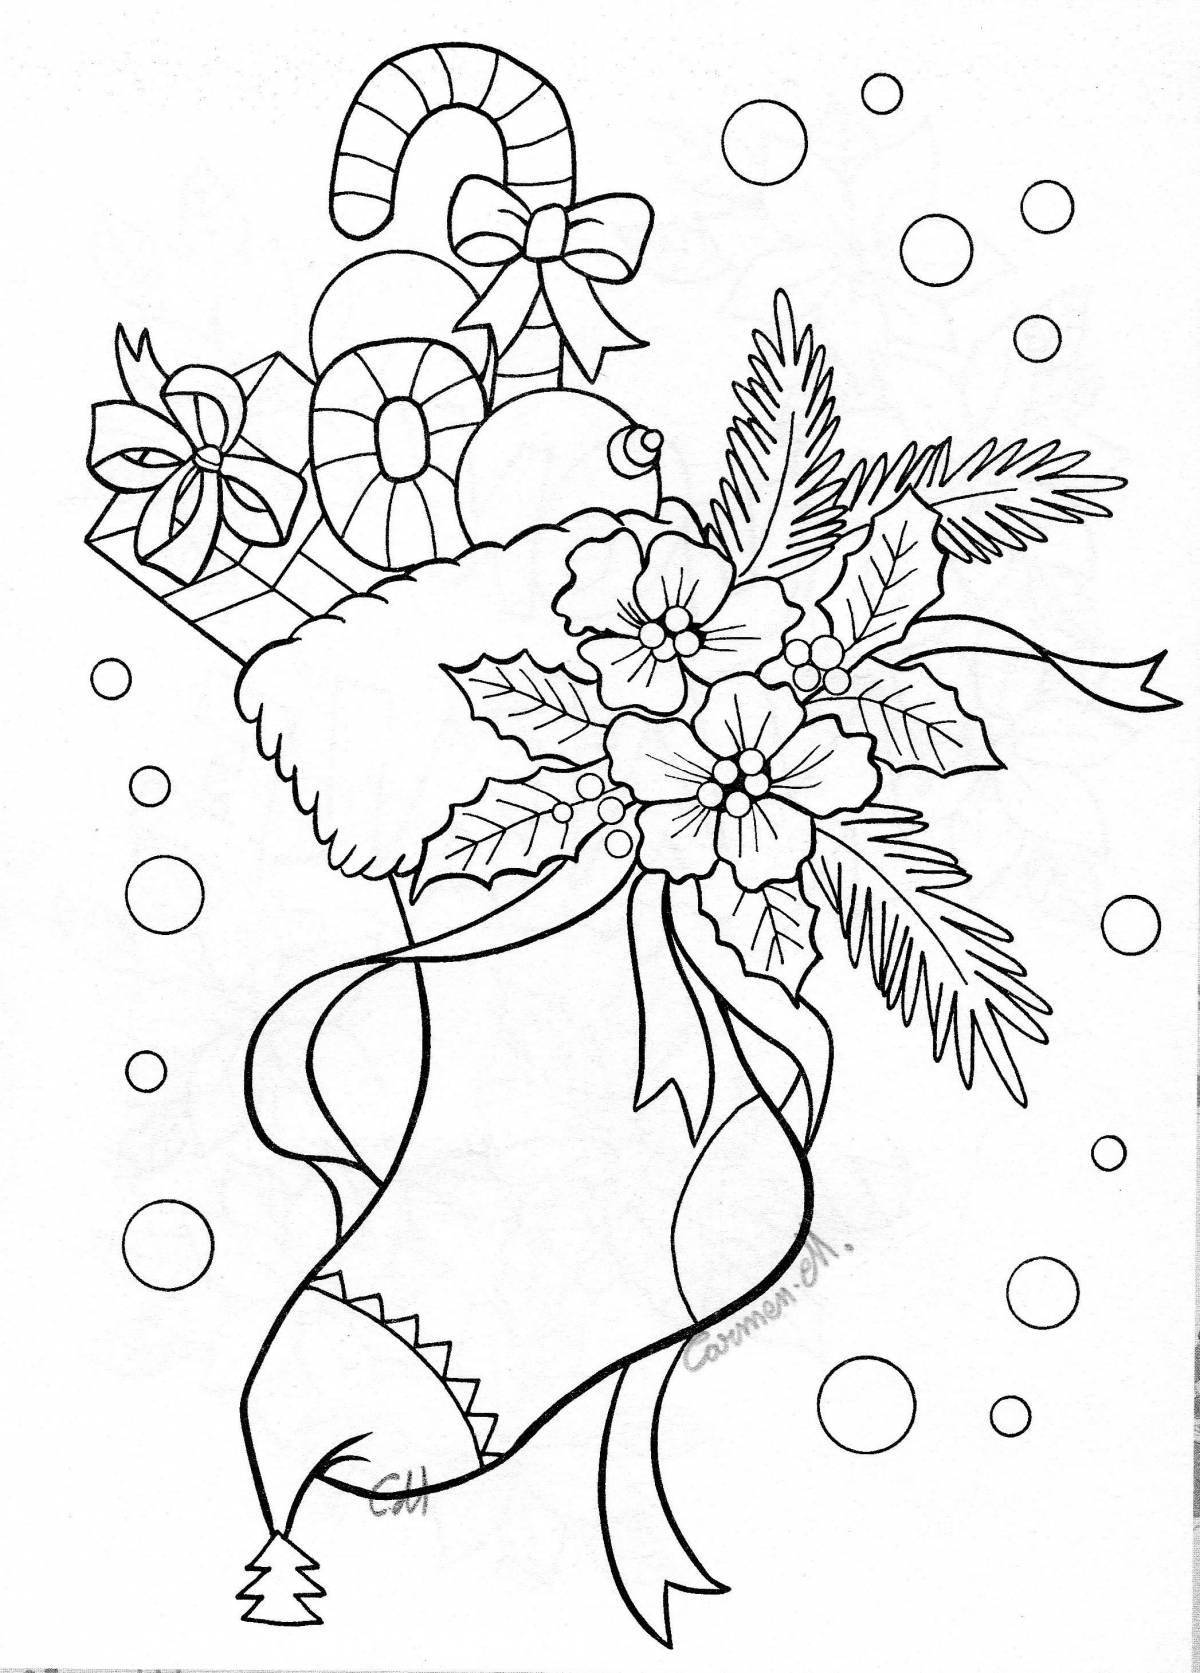 Happy new year 2023 coloring book